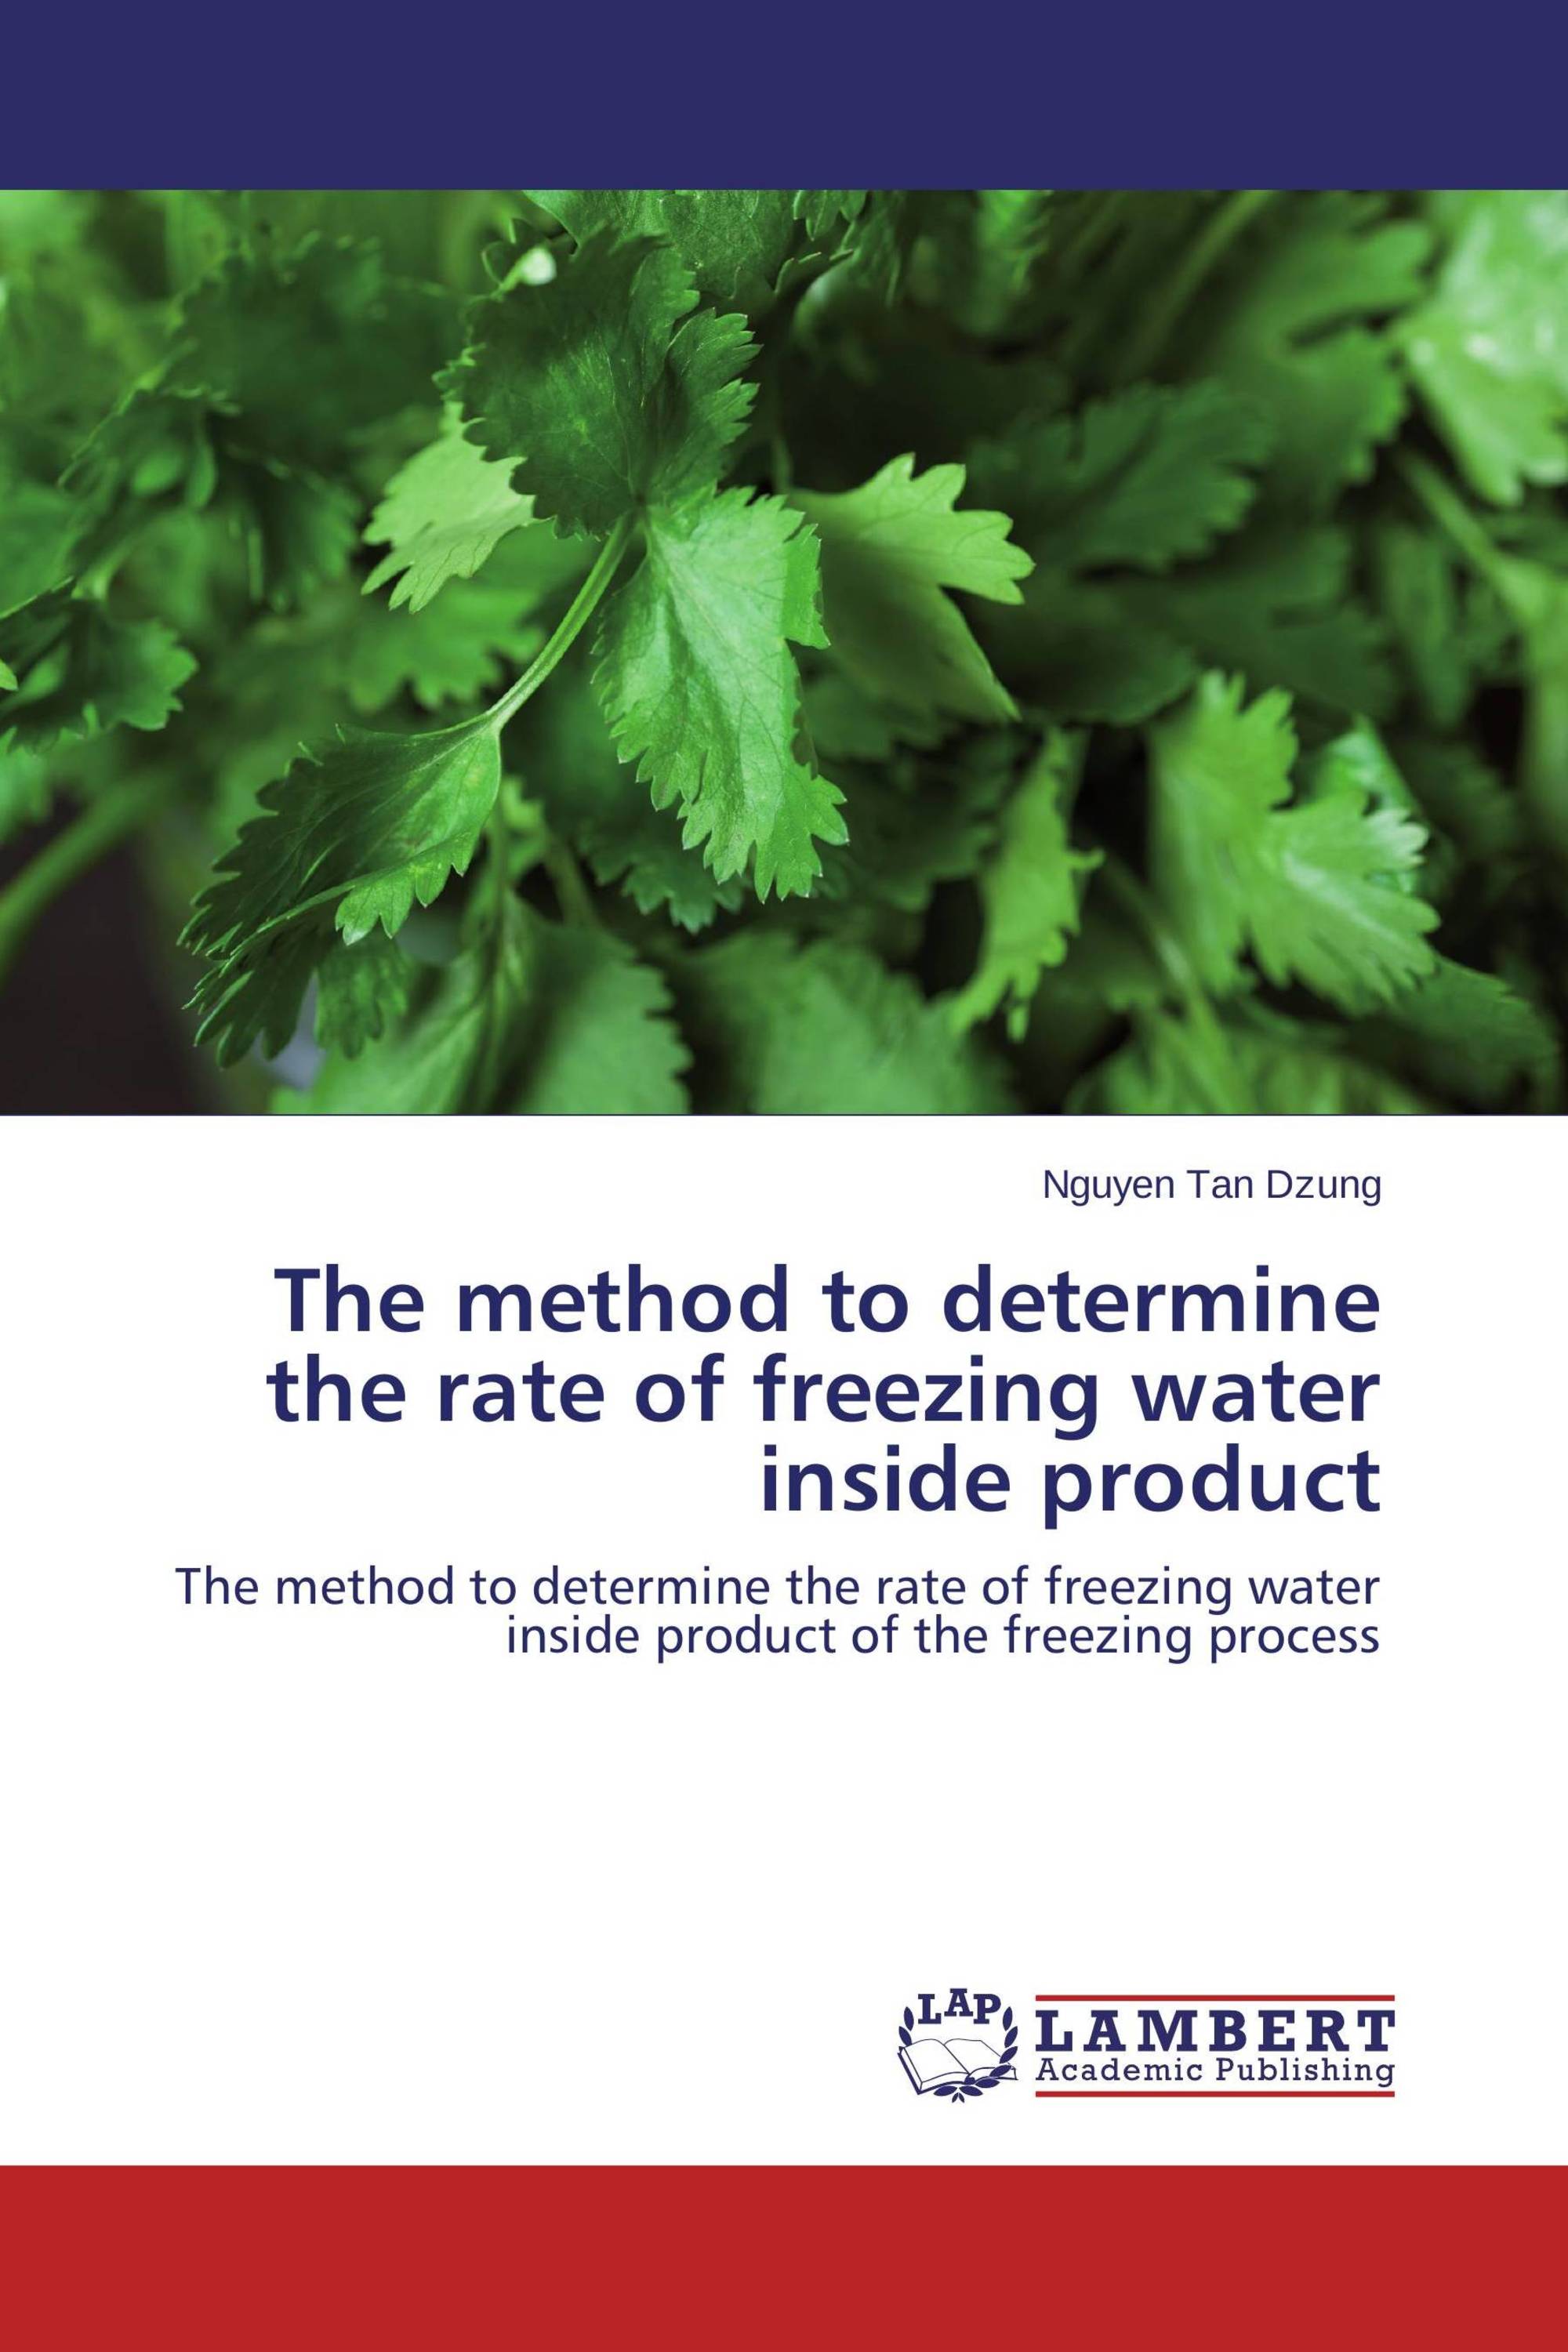 The method to determine the rate of freezing water inside product